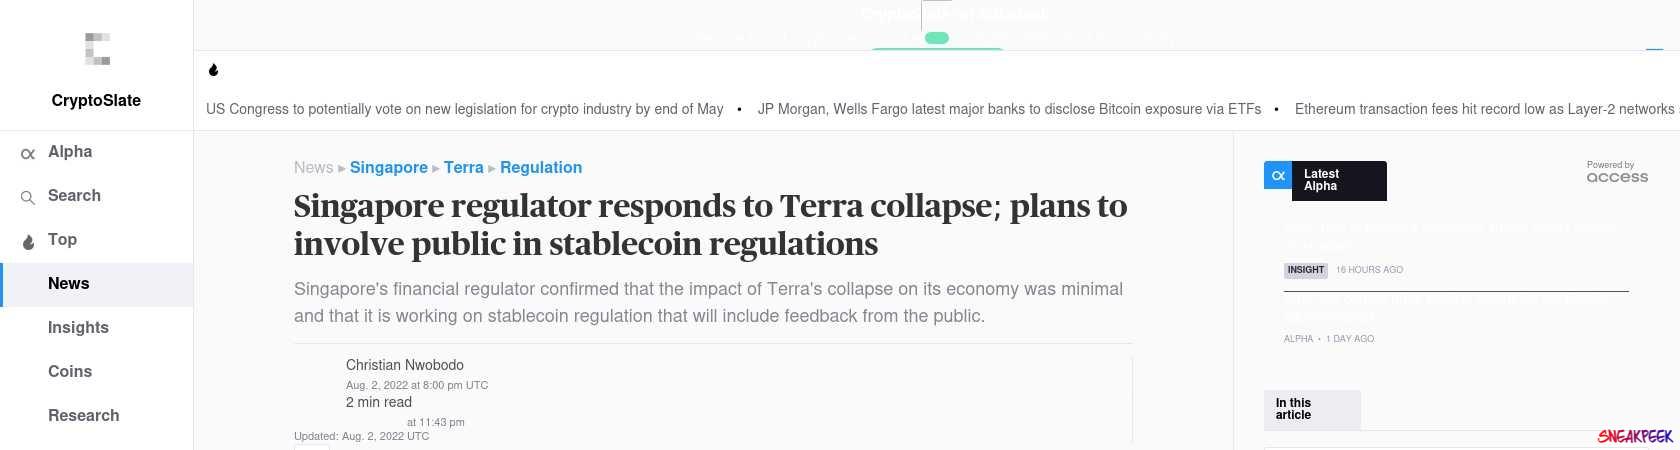 Read the full Article:  ⭲ Singapore regulator responds to Terra collapse; plans to involve public in stablecoin regulations